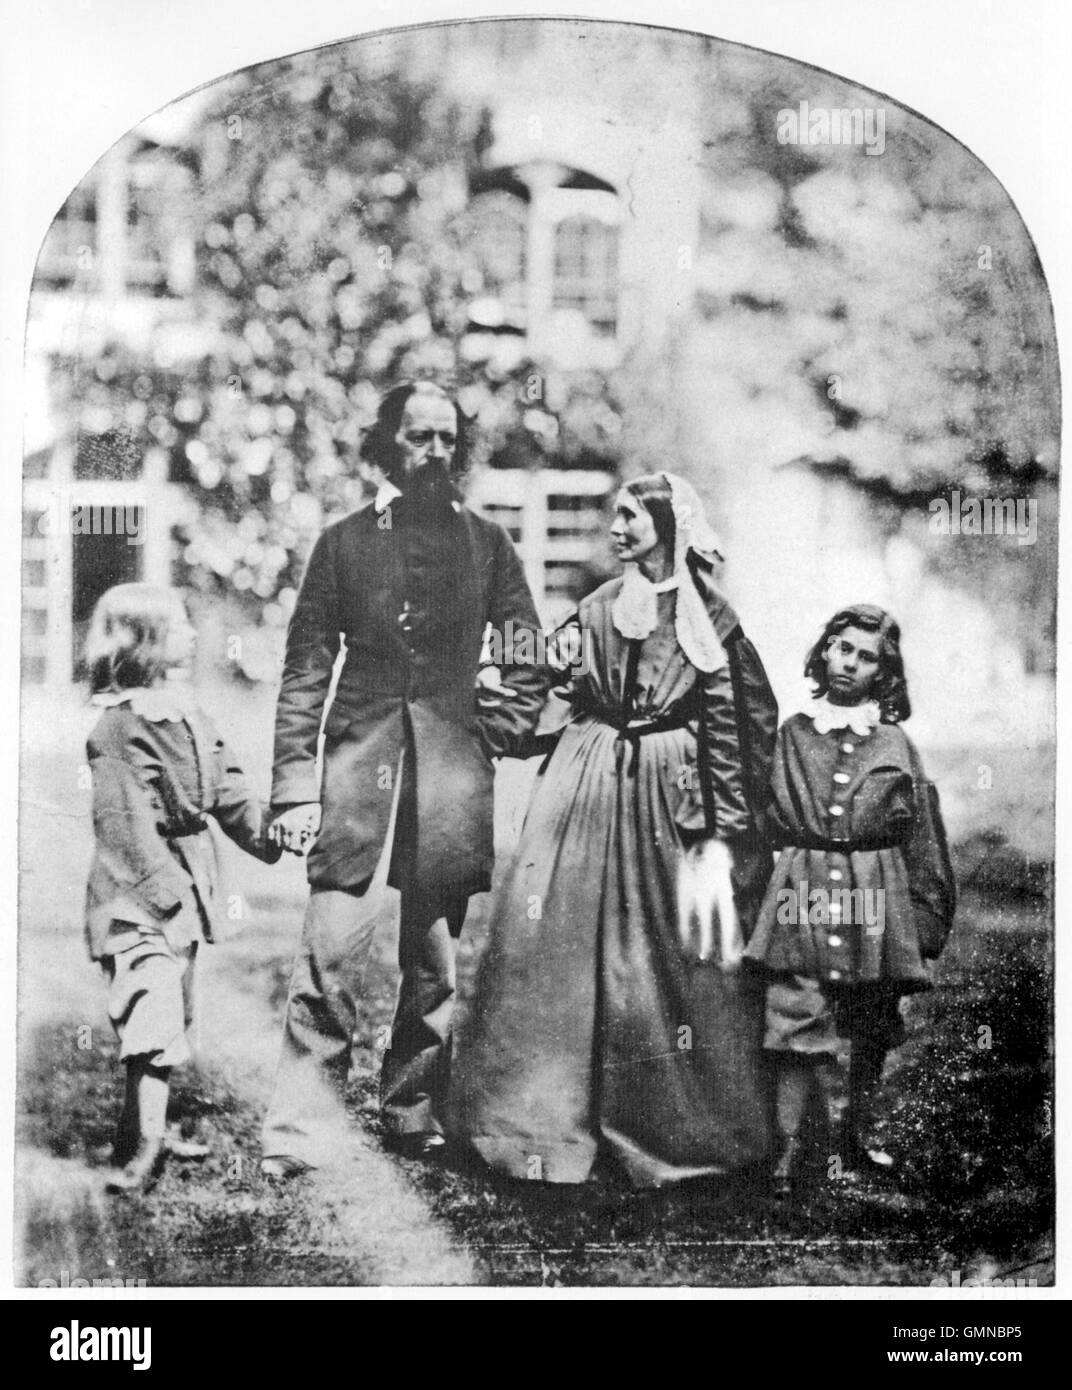 ALFRED TENNYSON (1809-1892) English poet with his family at their home Farringford House in Freshwater Bay on the Isle of Wight in 1862. From left: Lionel, Tennyson, wife Emily, Hallam. Photo Oscar Rejlander Stock Photo